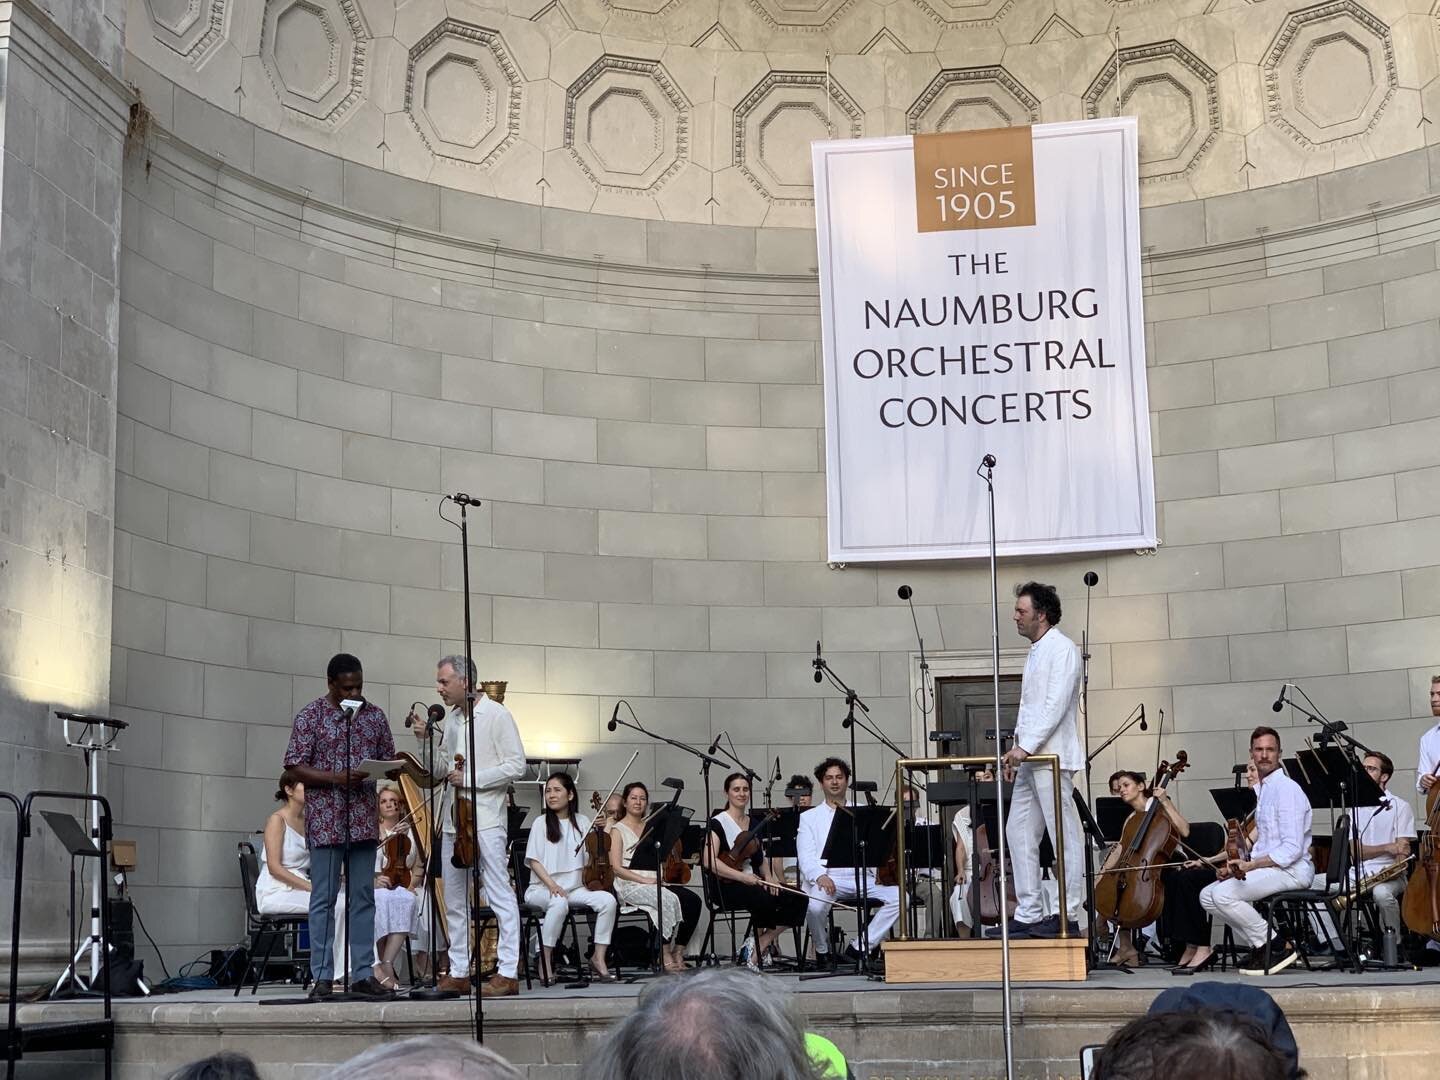 The Knights perform at the Naumburg Bandshell in Central Park tonight!